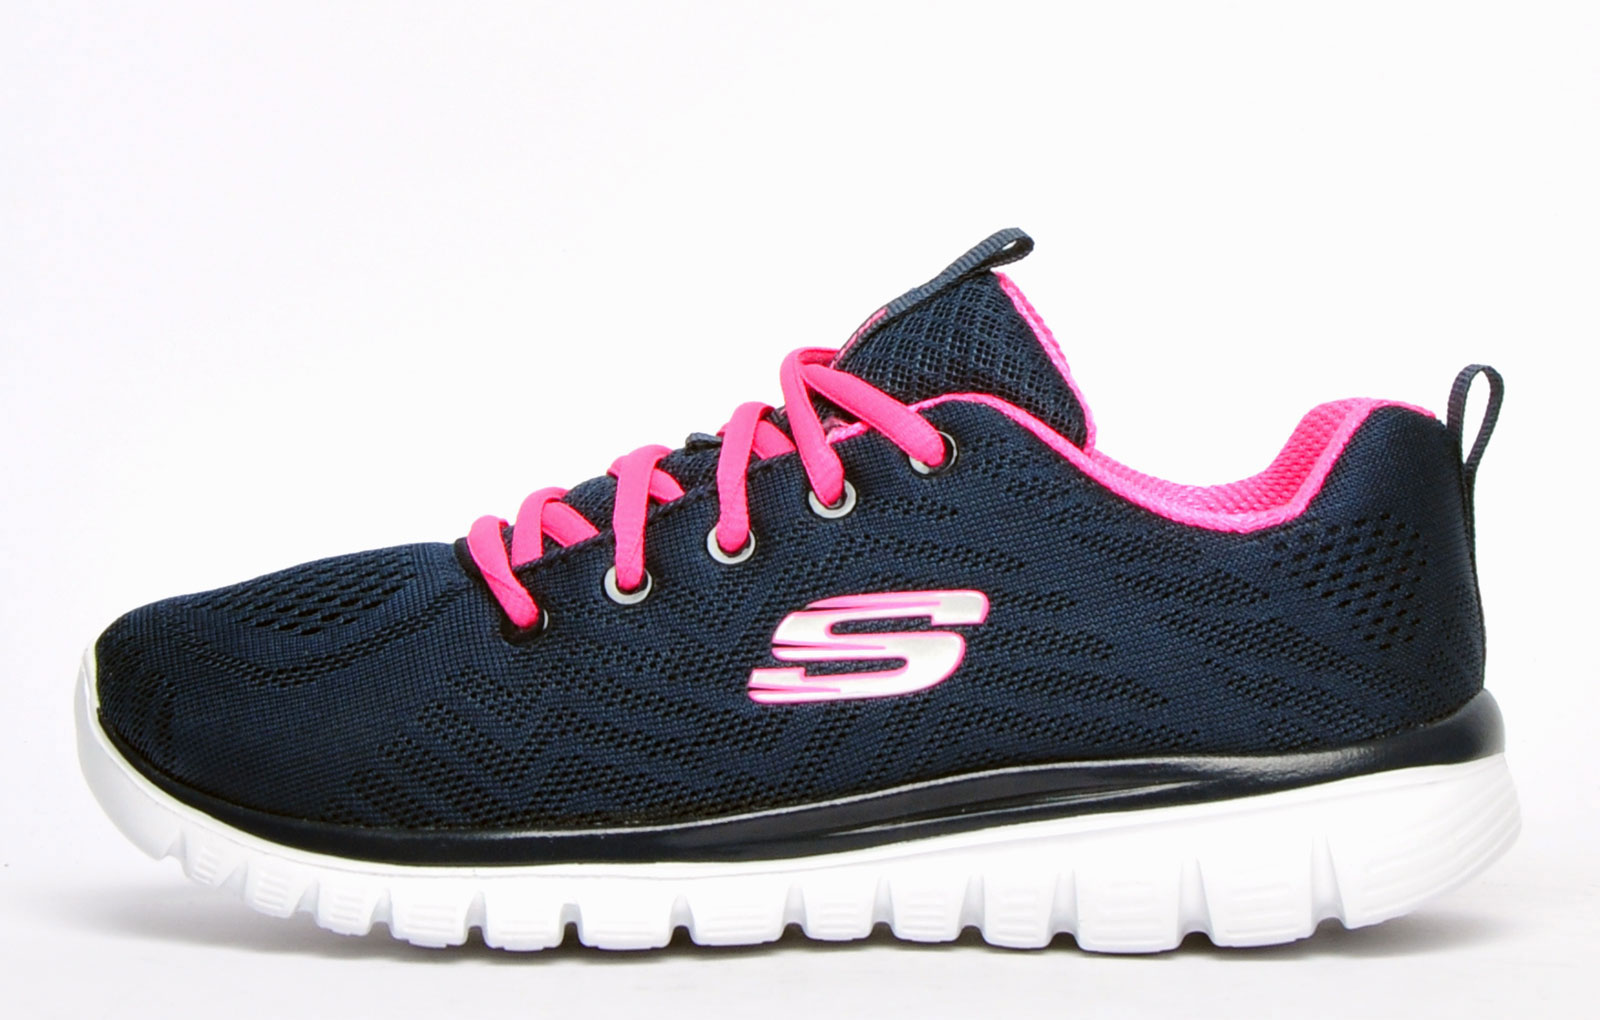 Cheap Skechers Shoes Women UK – Free UK Delivery |